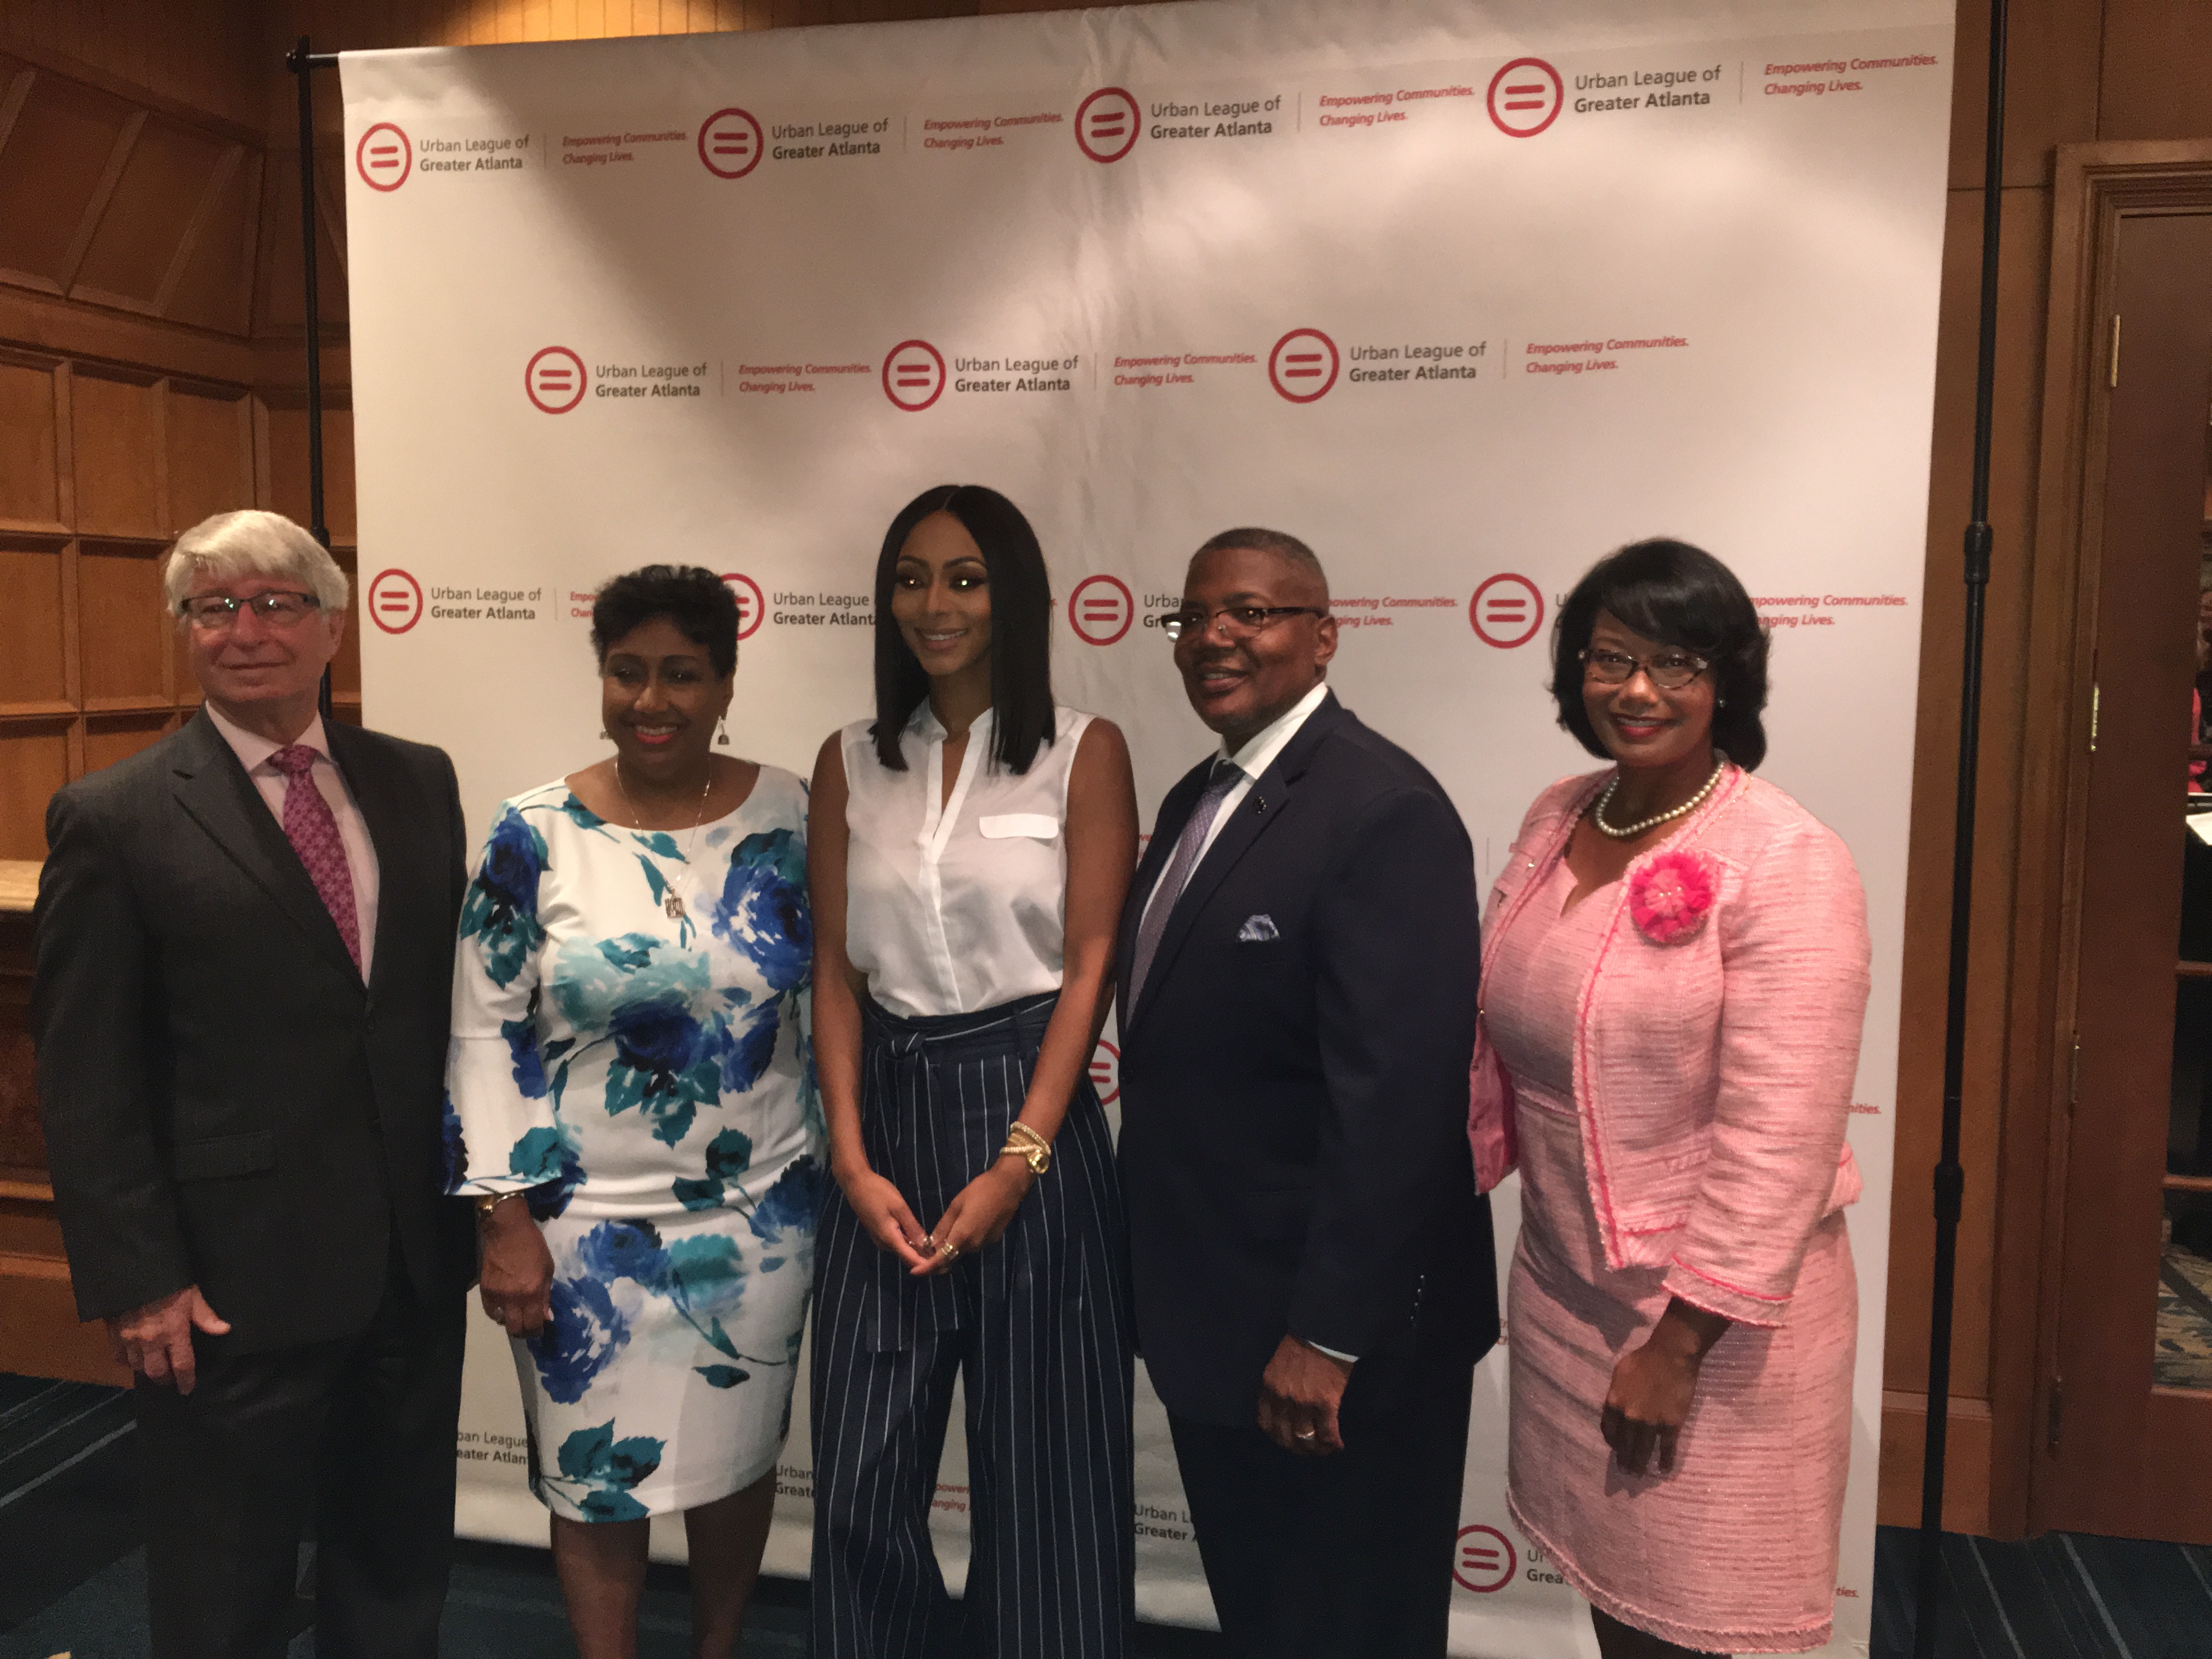 Keri Hilson Honored by the Urban League of Greater Atlanta